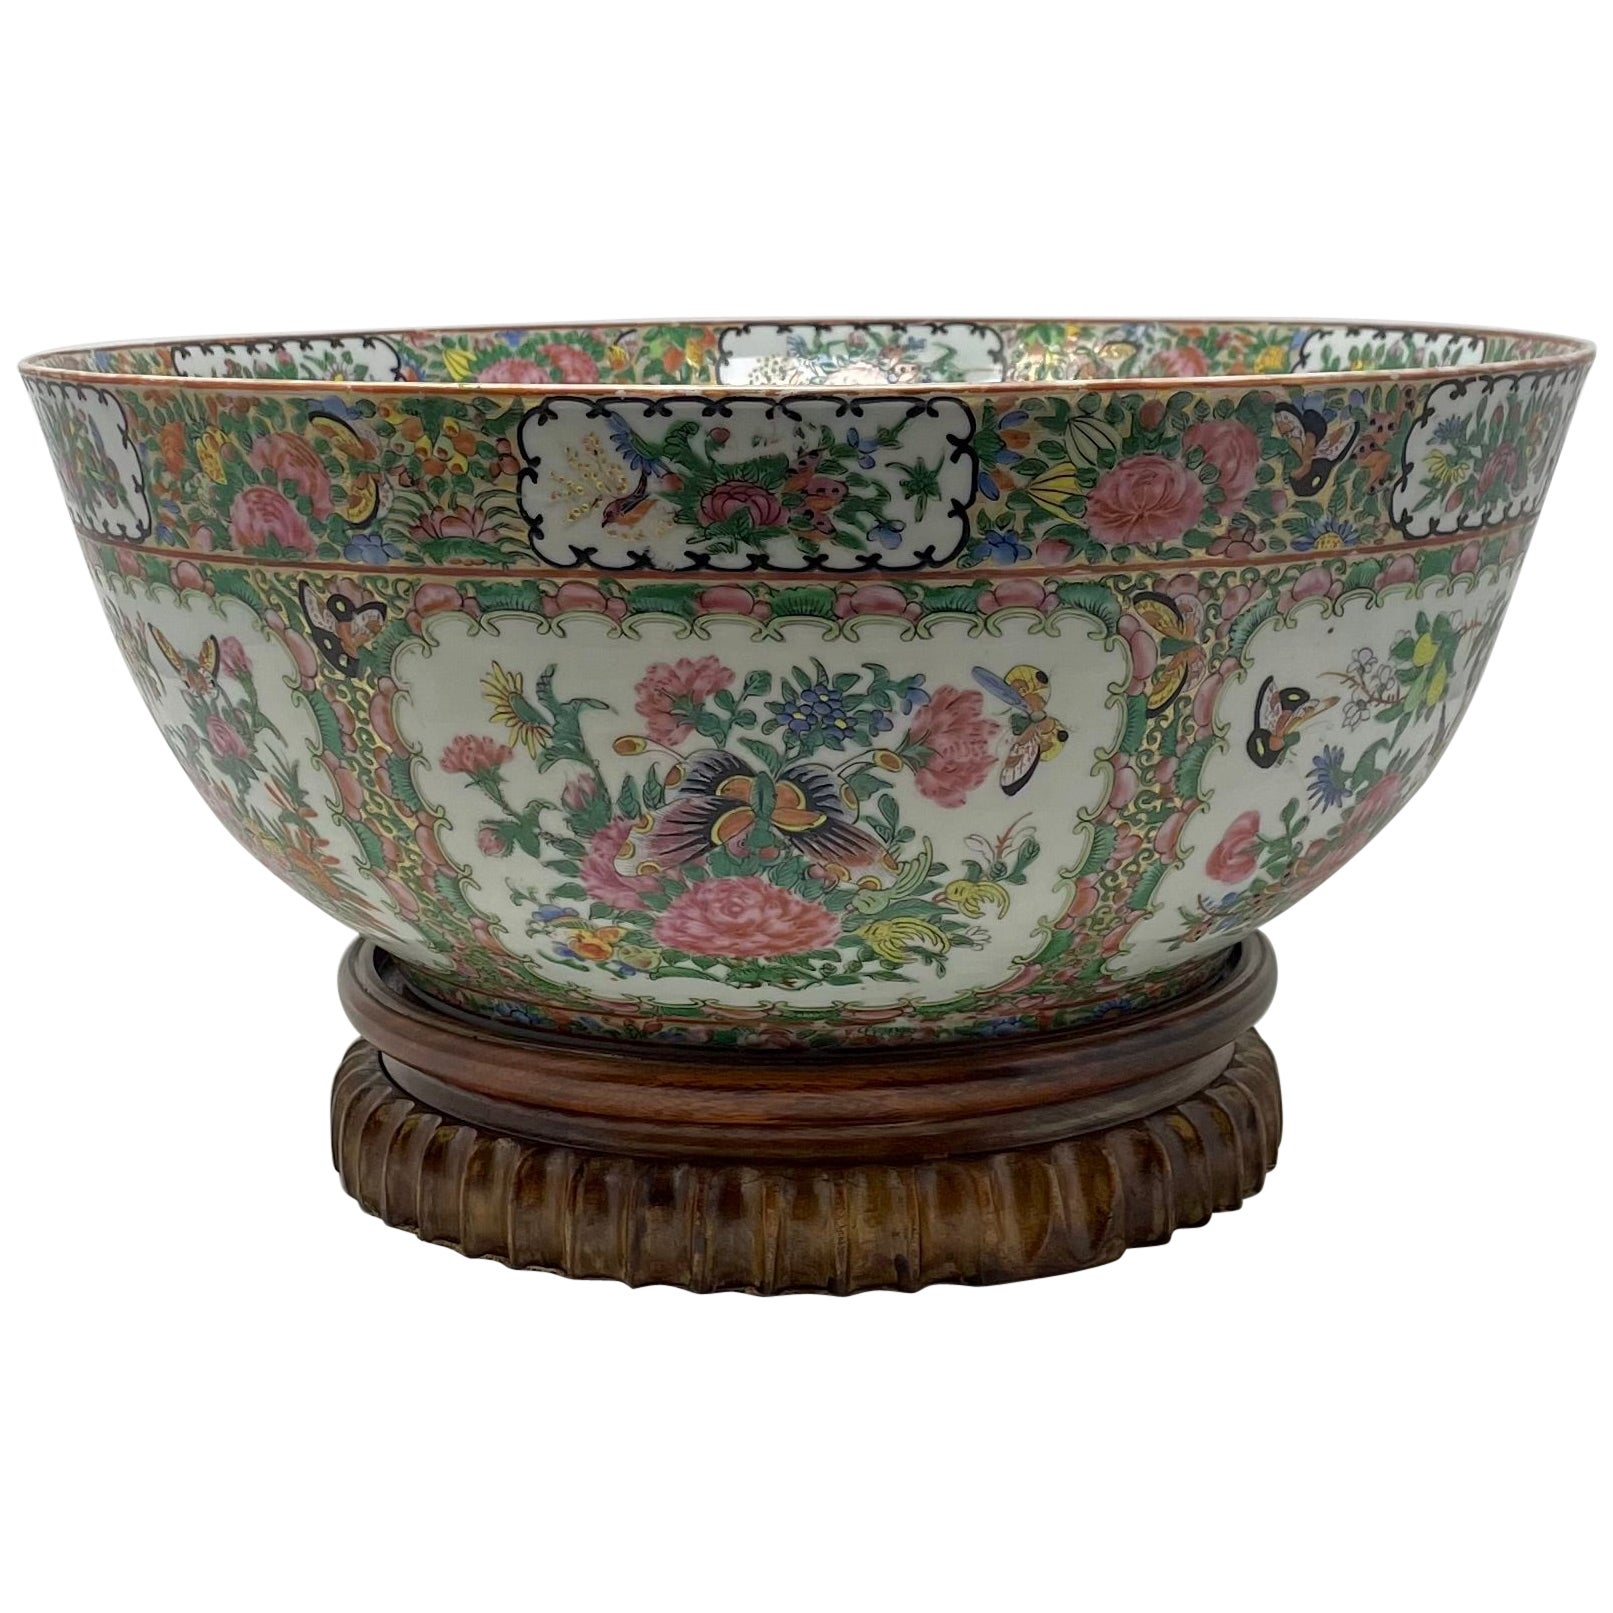 Large Antique 19th Century Chinese Rose Canton Porcelain Bowl on Original Stand